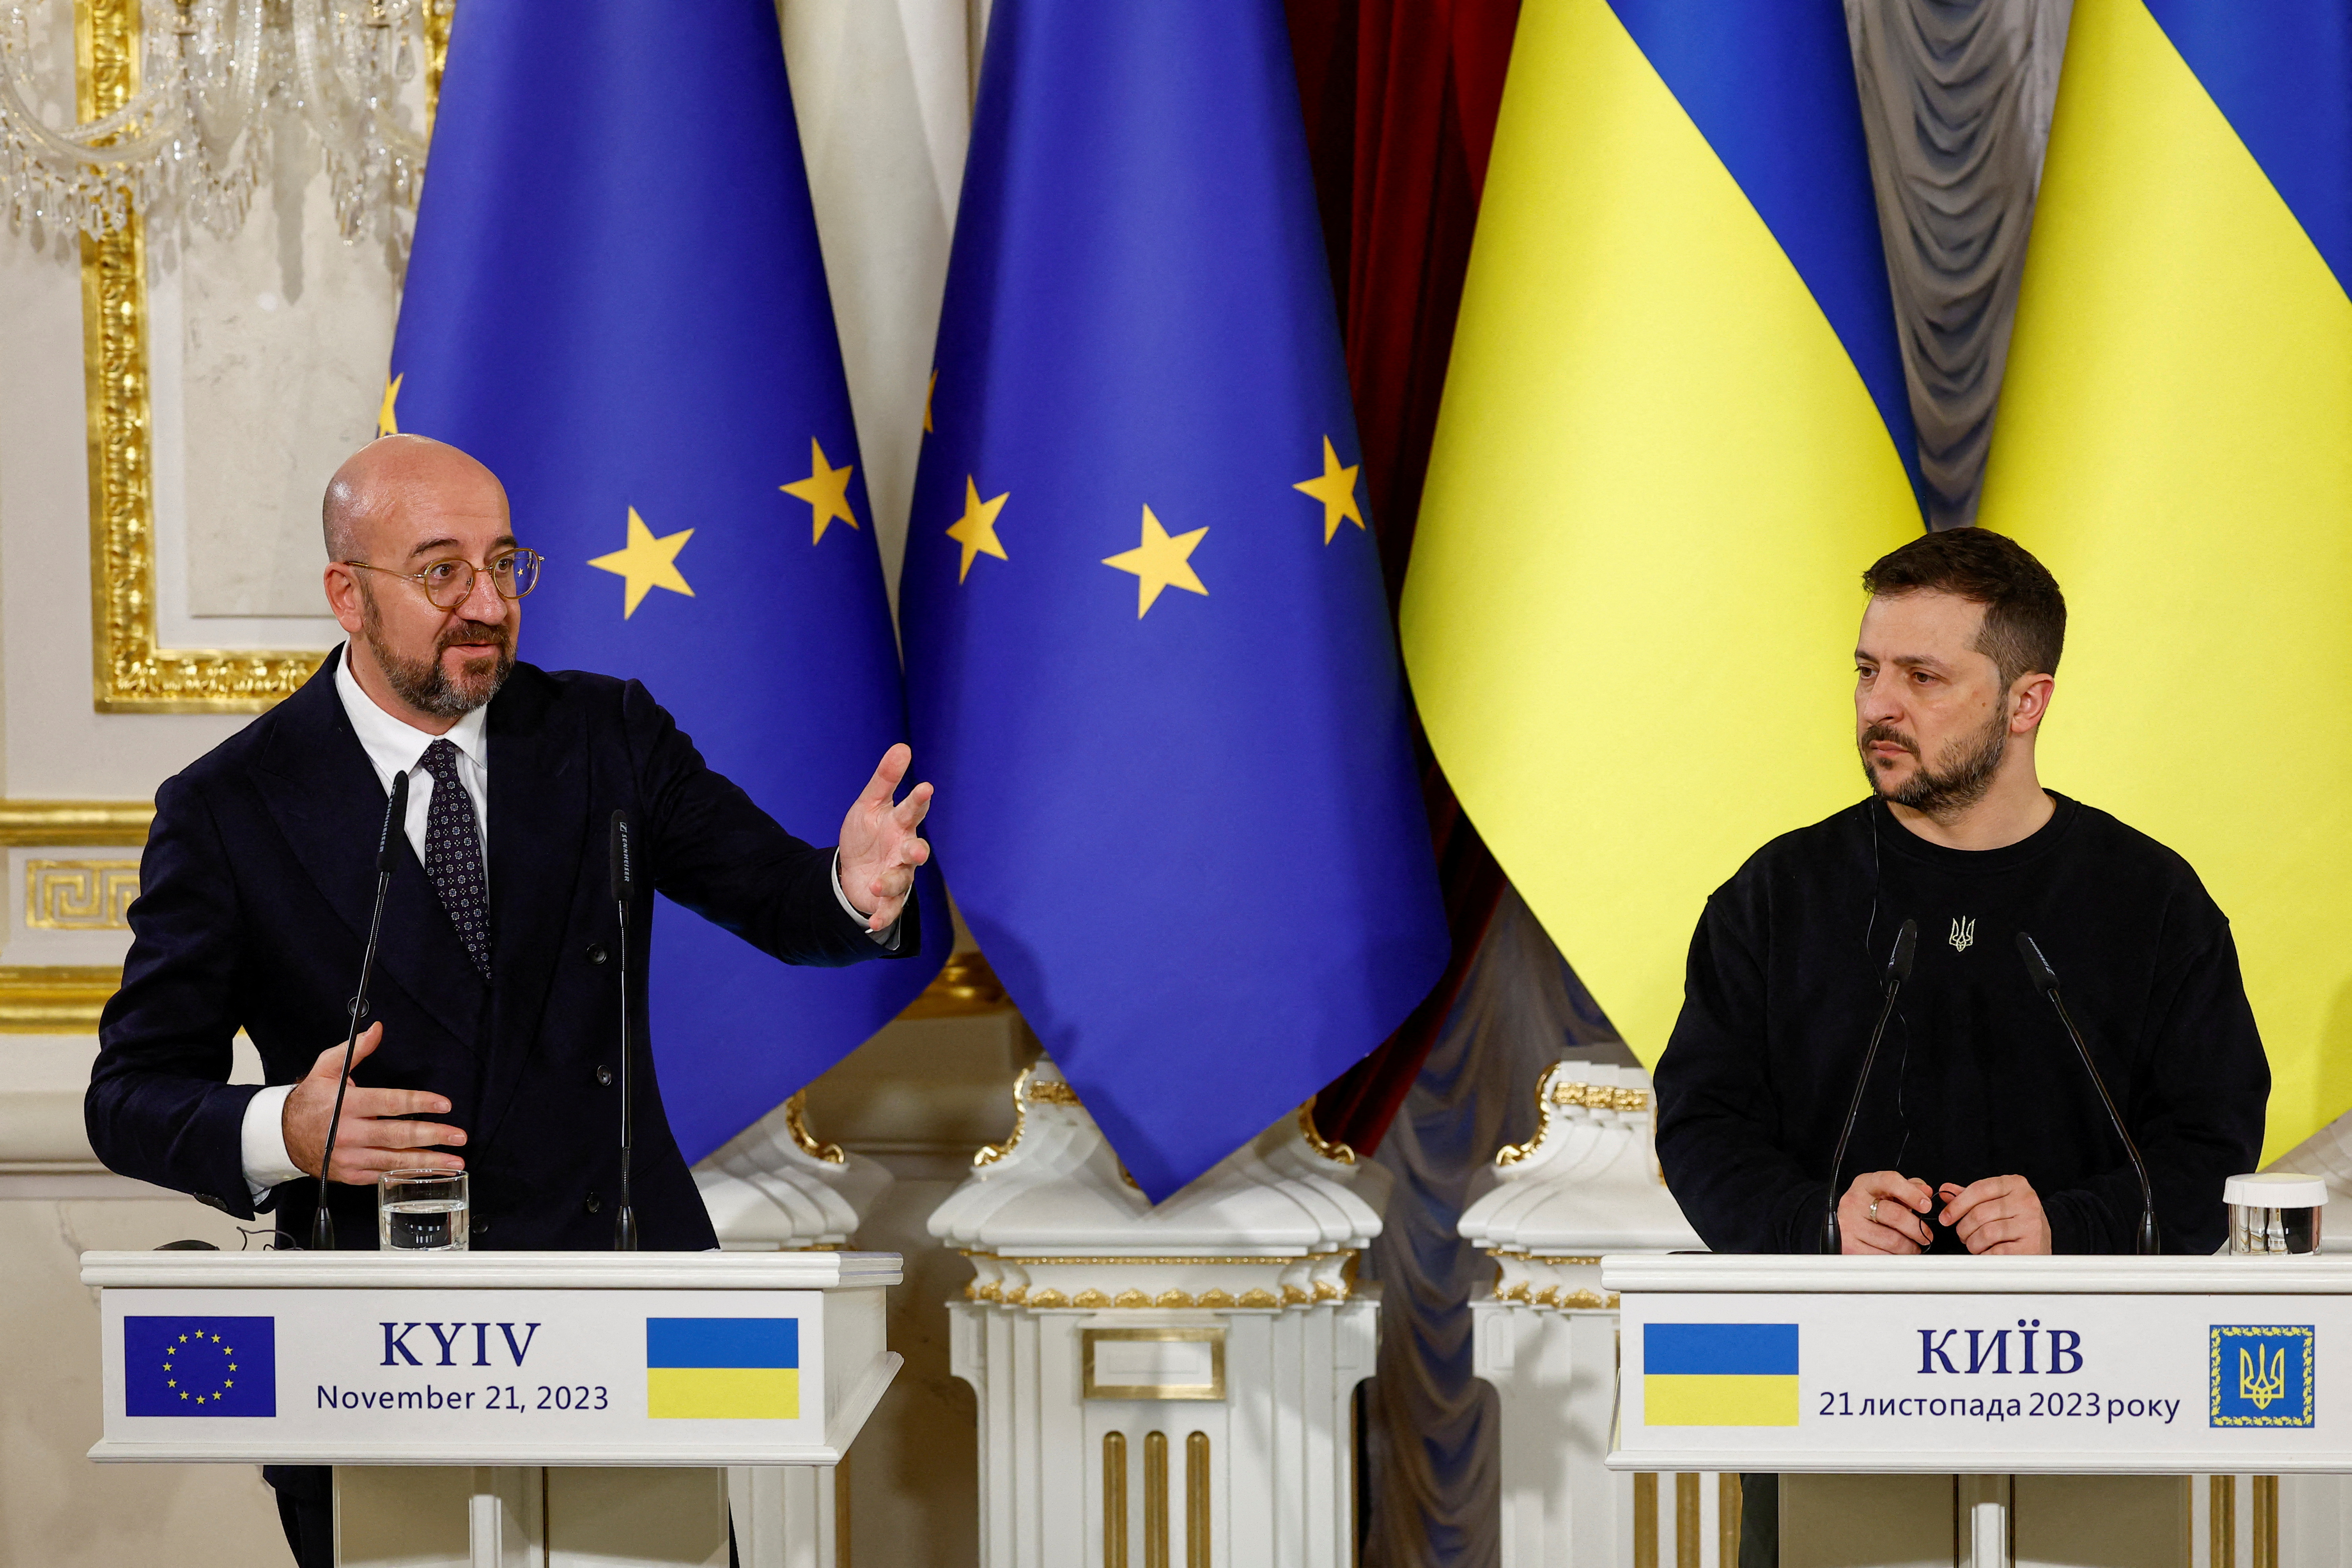 Ukraine's President Zelenskiy, Moldova's President Sandu and President of the European Council Michel attend a joint press conference in Kyiv